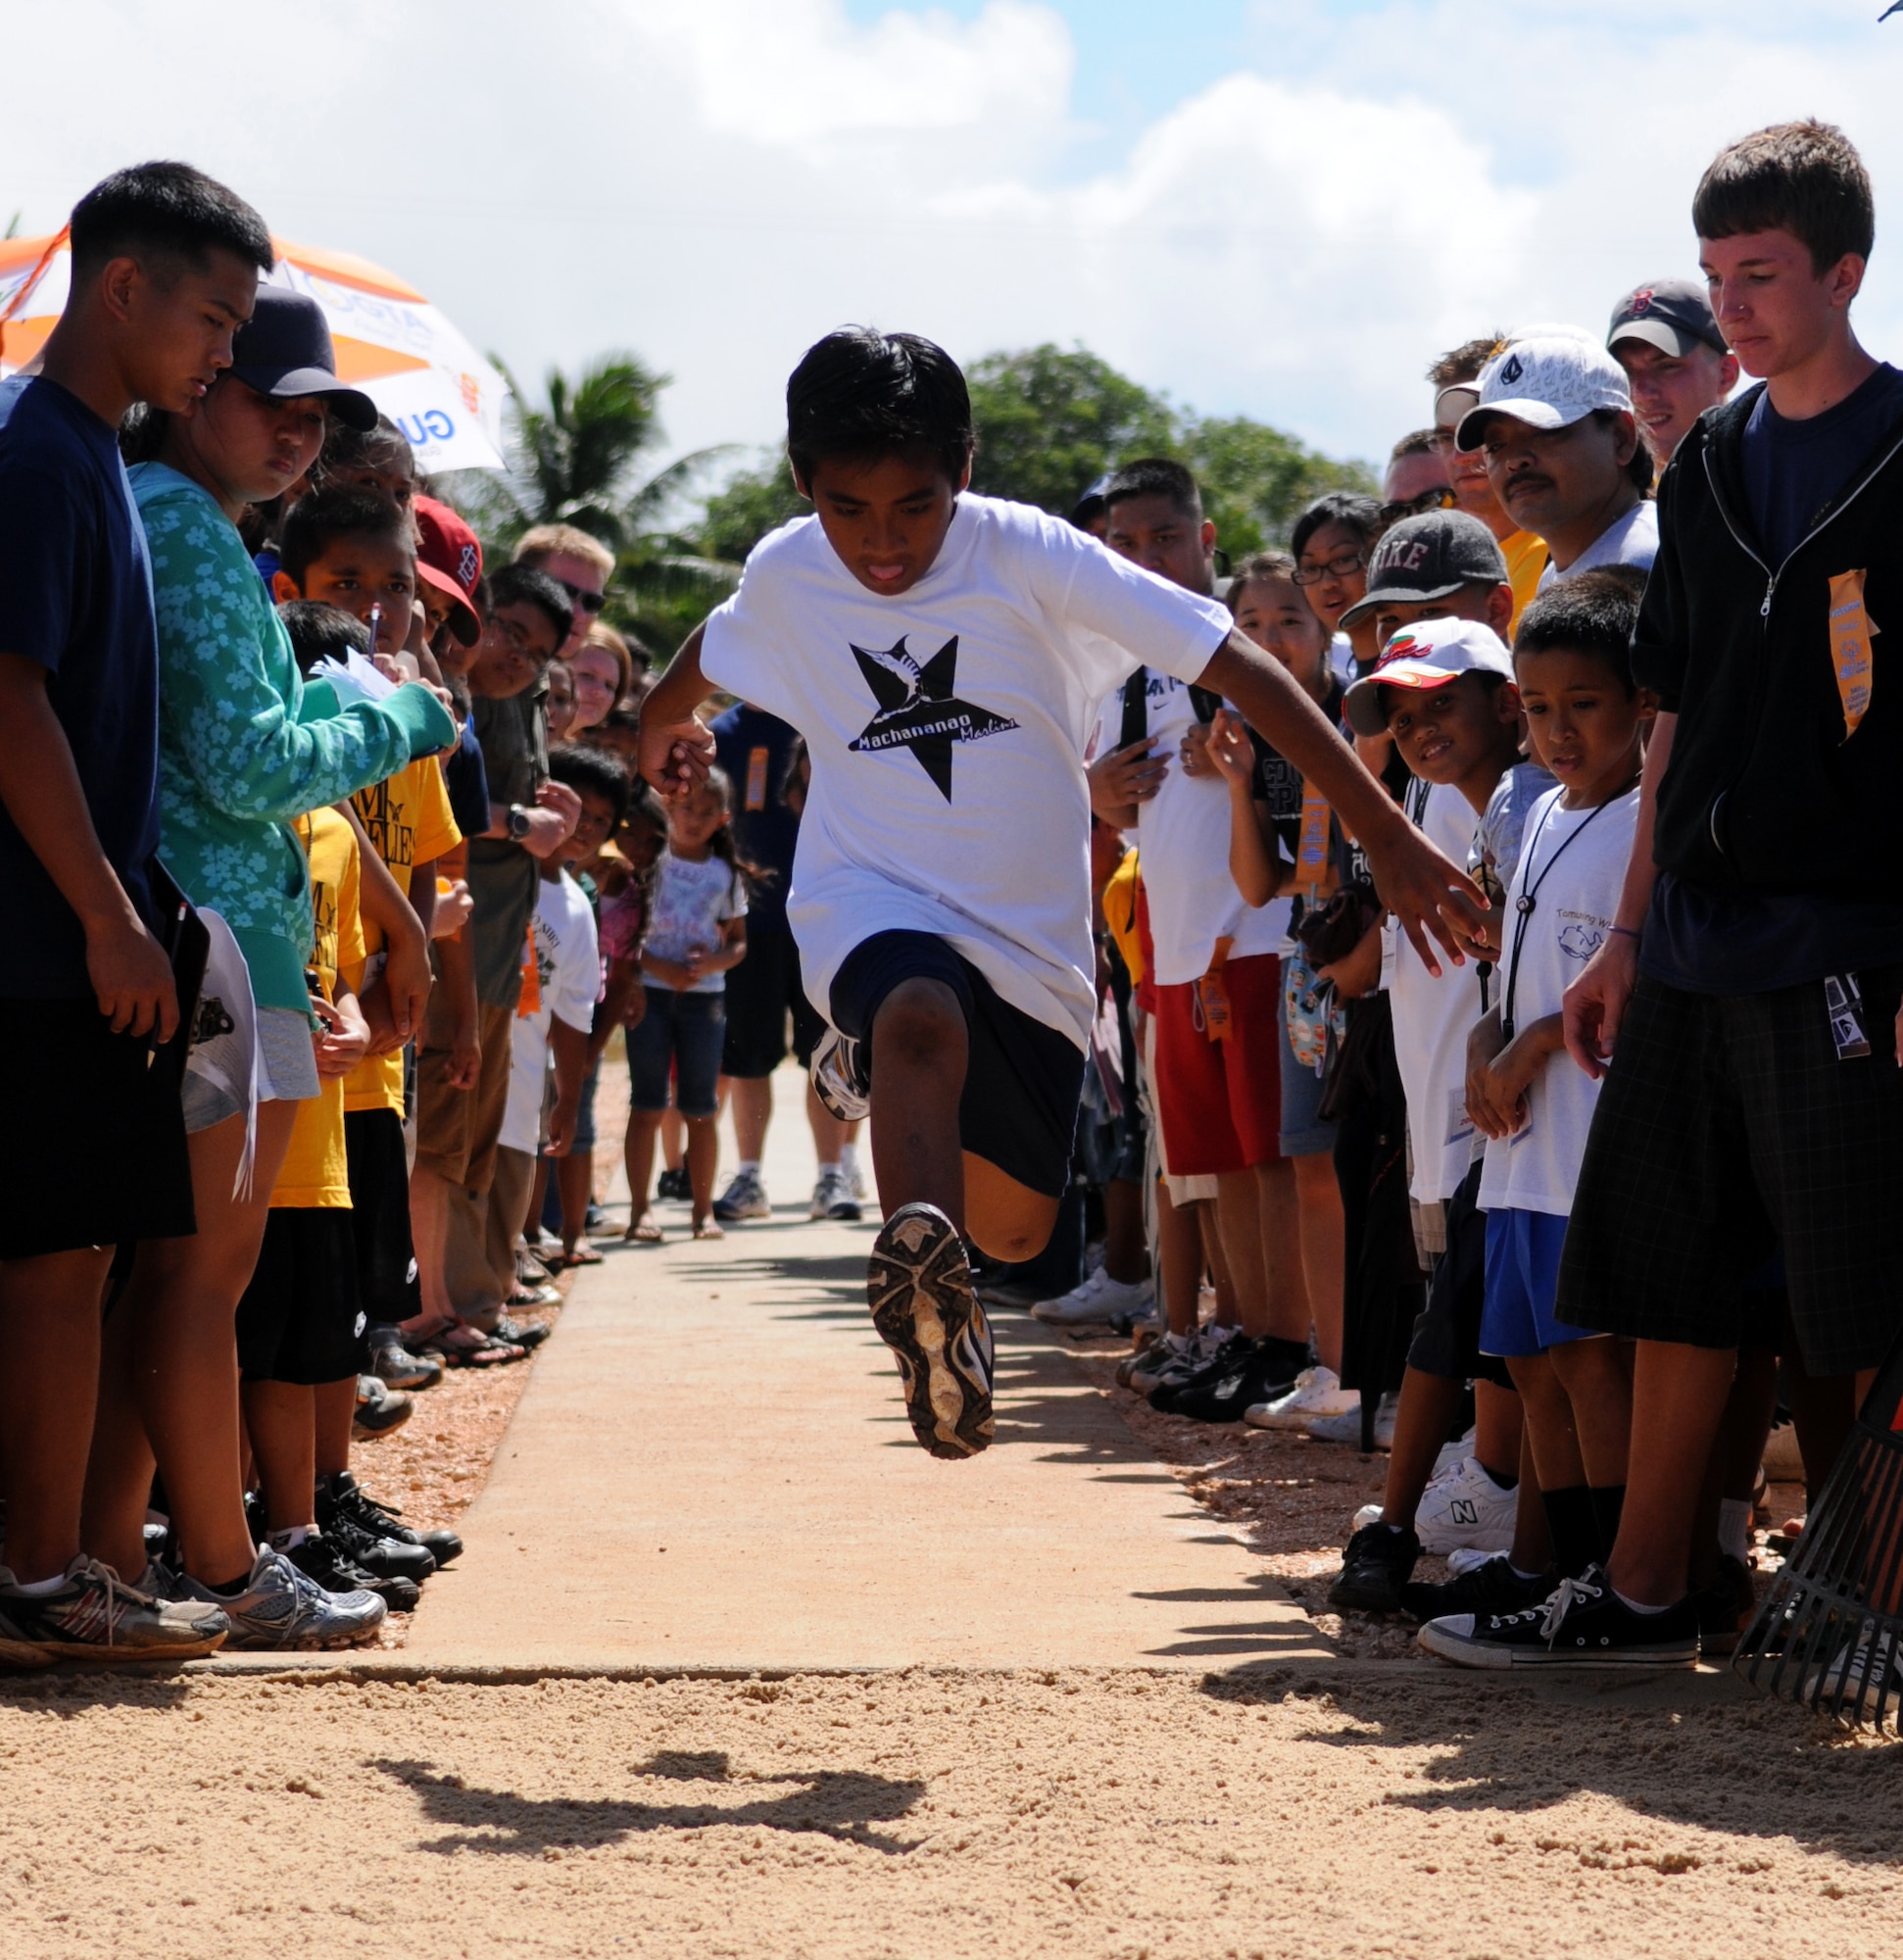 ANDERSEN AIR FORCE BASE, Guam – A Machananao Marlins Olympian jumps with all his might during the 33rd Annual Special Olympics Track and Field Competition held at Okkodo High School track March 14. Andersen's 554th RED HORSE Squadron along with Guam donators made it possible for Olympians to compete in long jump by building the sand pit. (U.S. Air Force photo by Airman 1st Class Courtney Witt)

